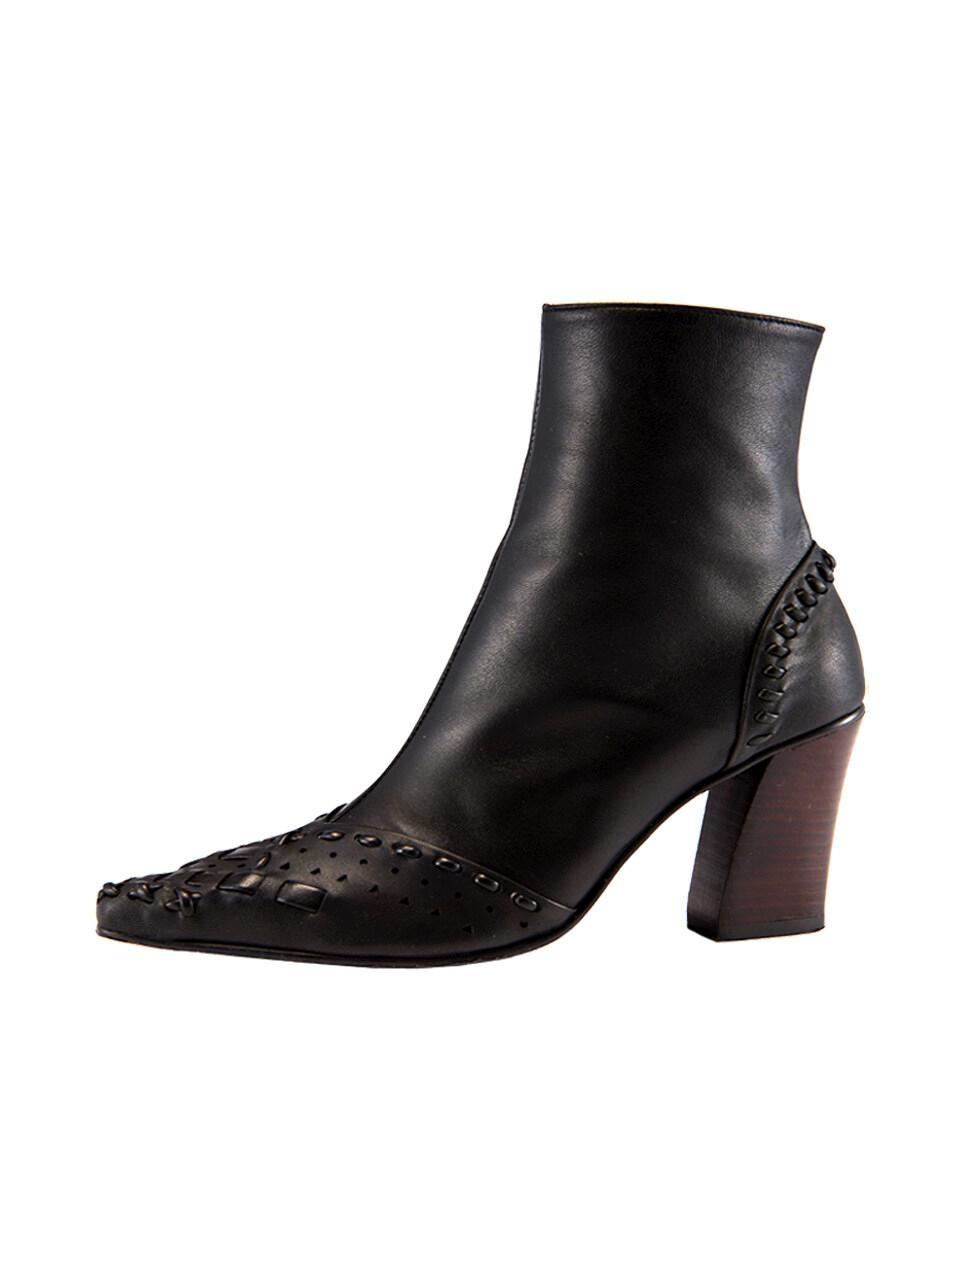 Reike Nen Leather |^|string Embroidery Slim Boots Black - Lyst